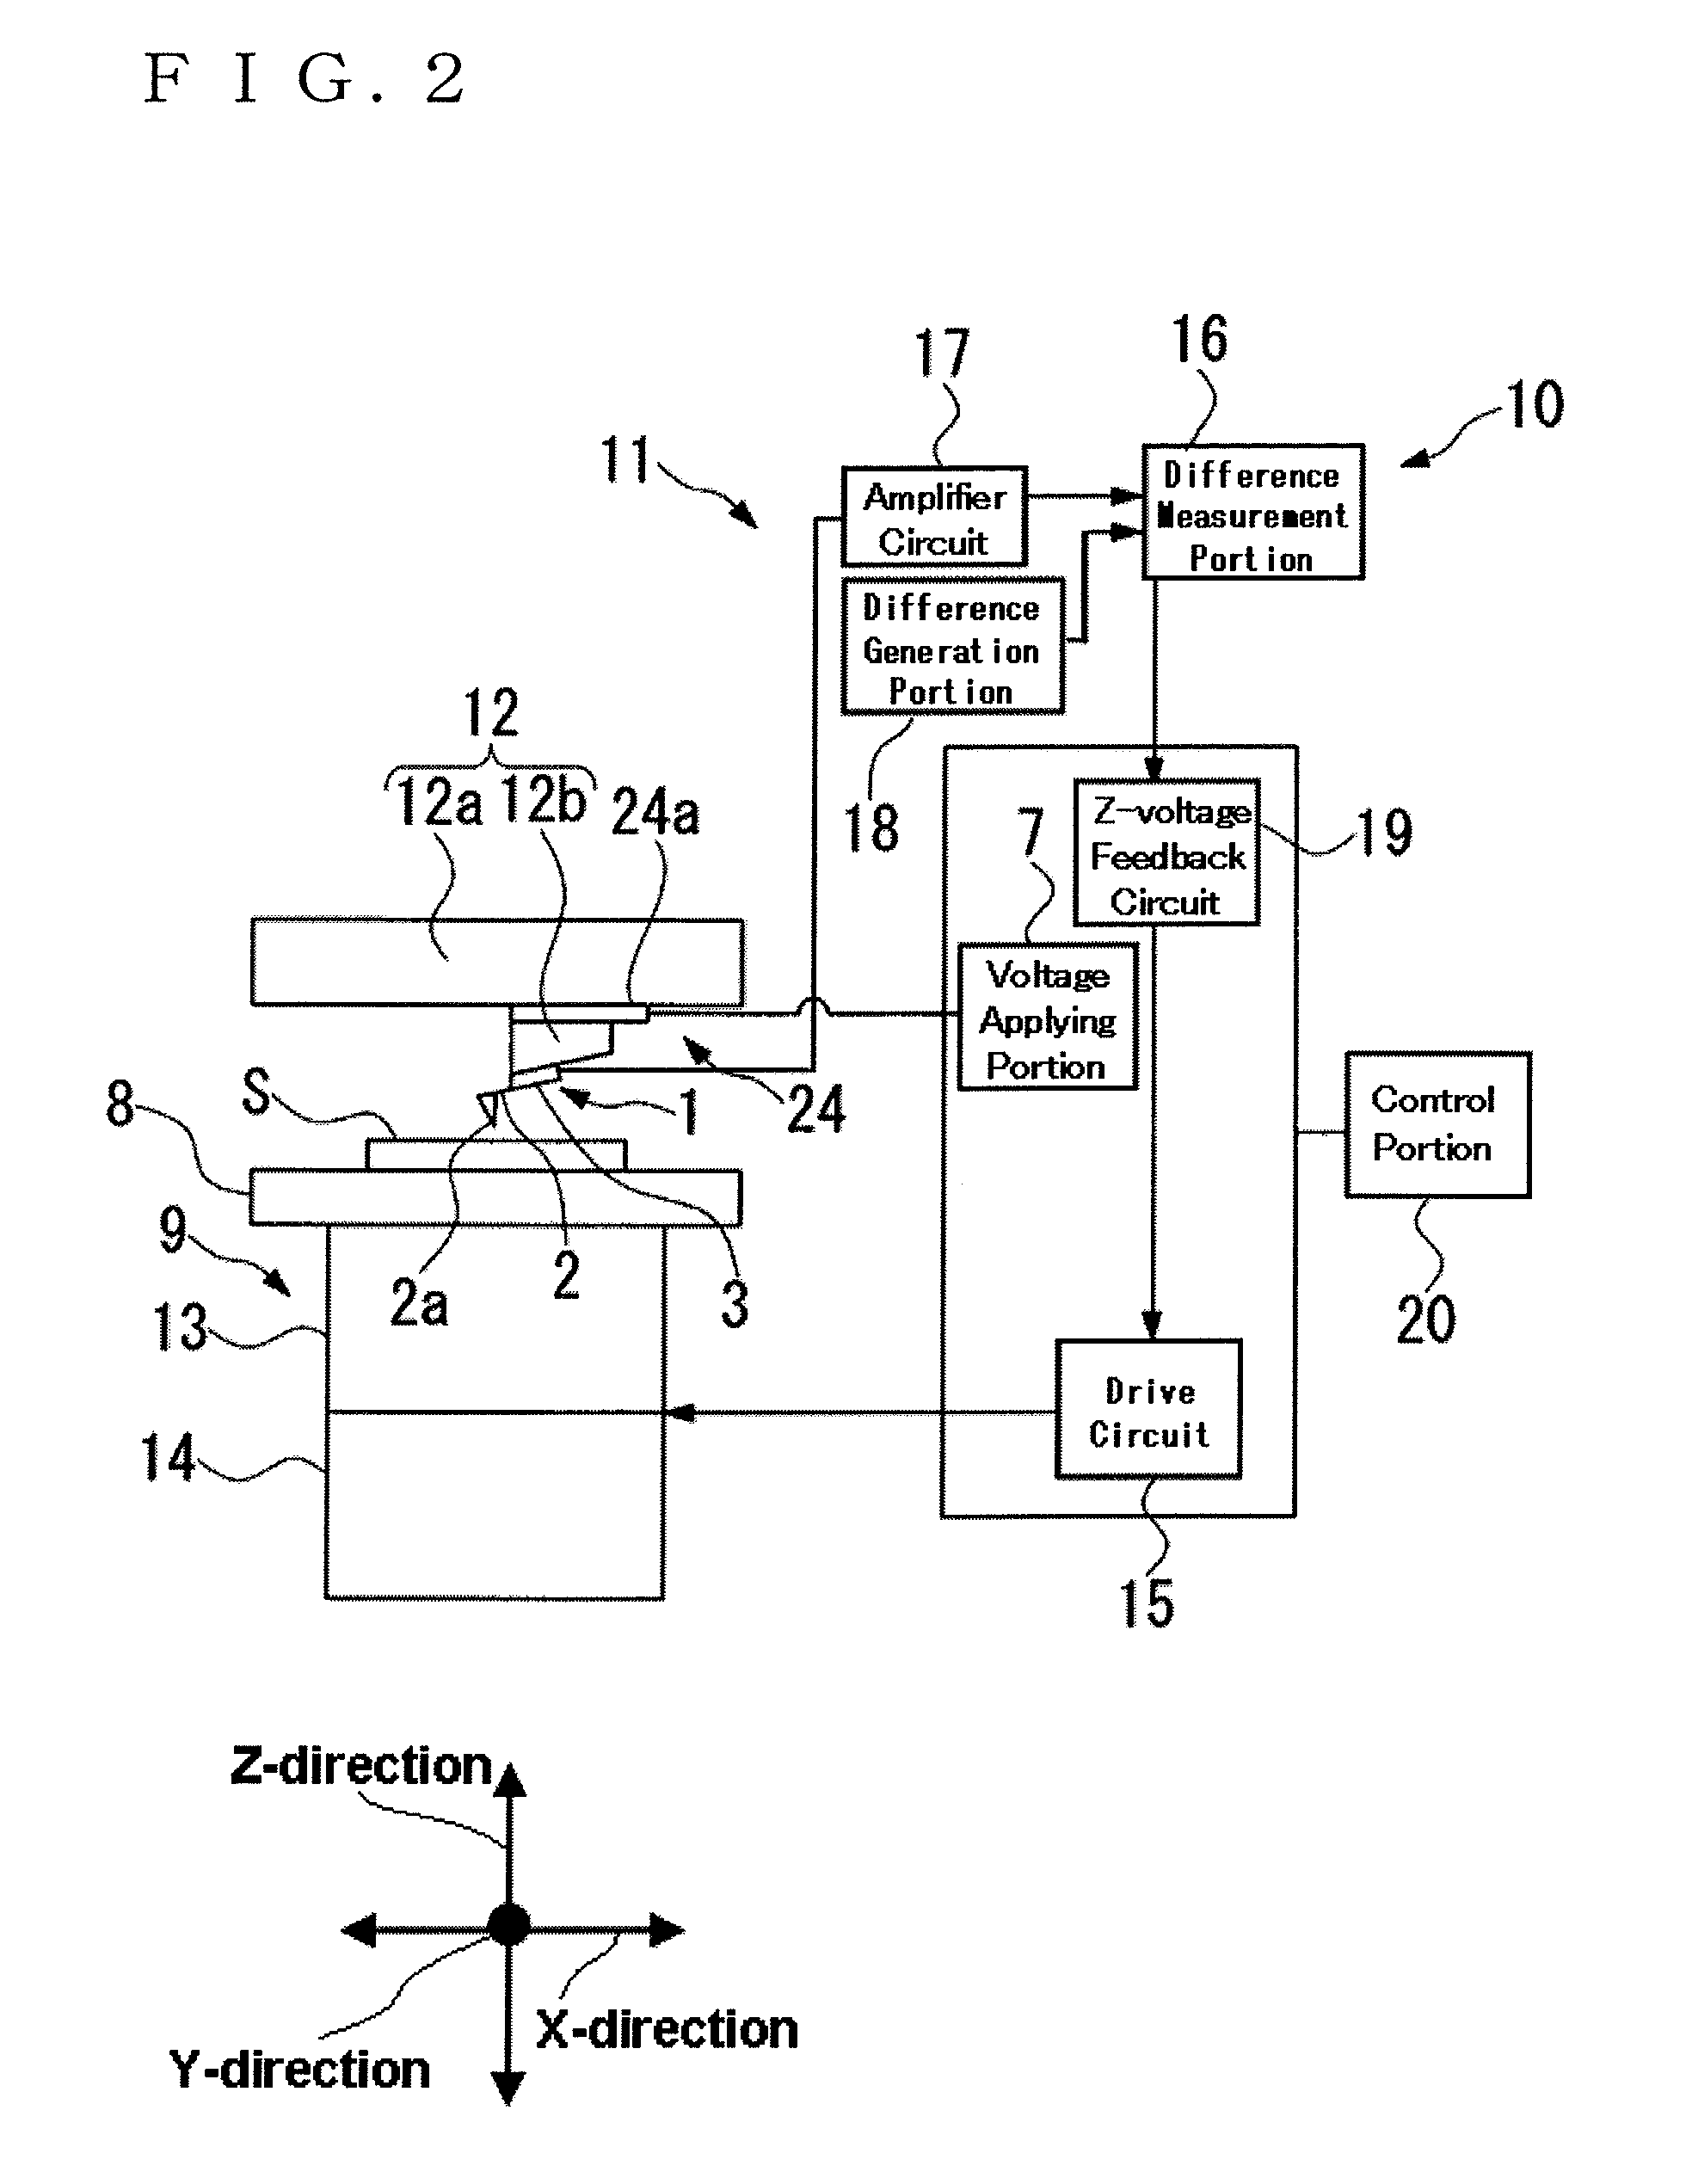 Cantilever, cantilever system, and probe microscope and adsorption mass sensor including the cantilever system